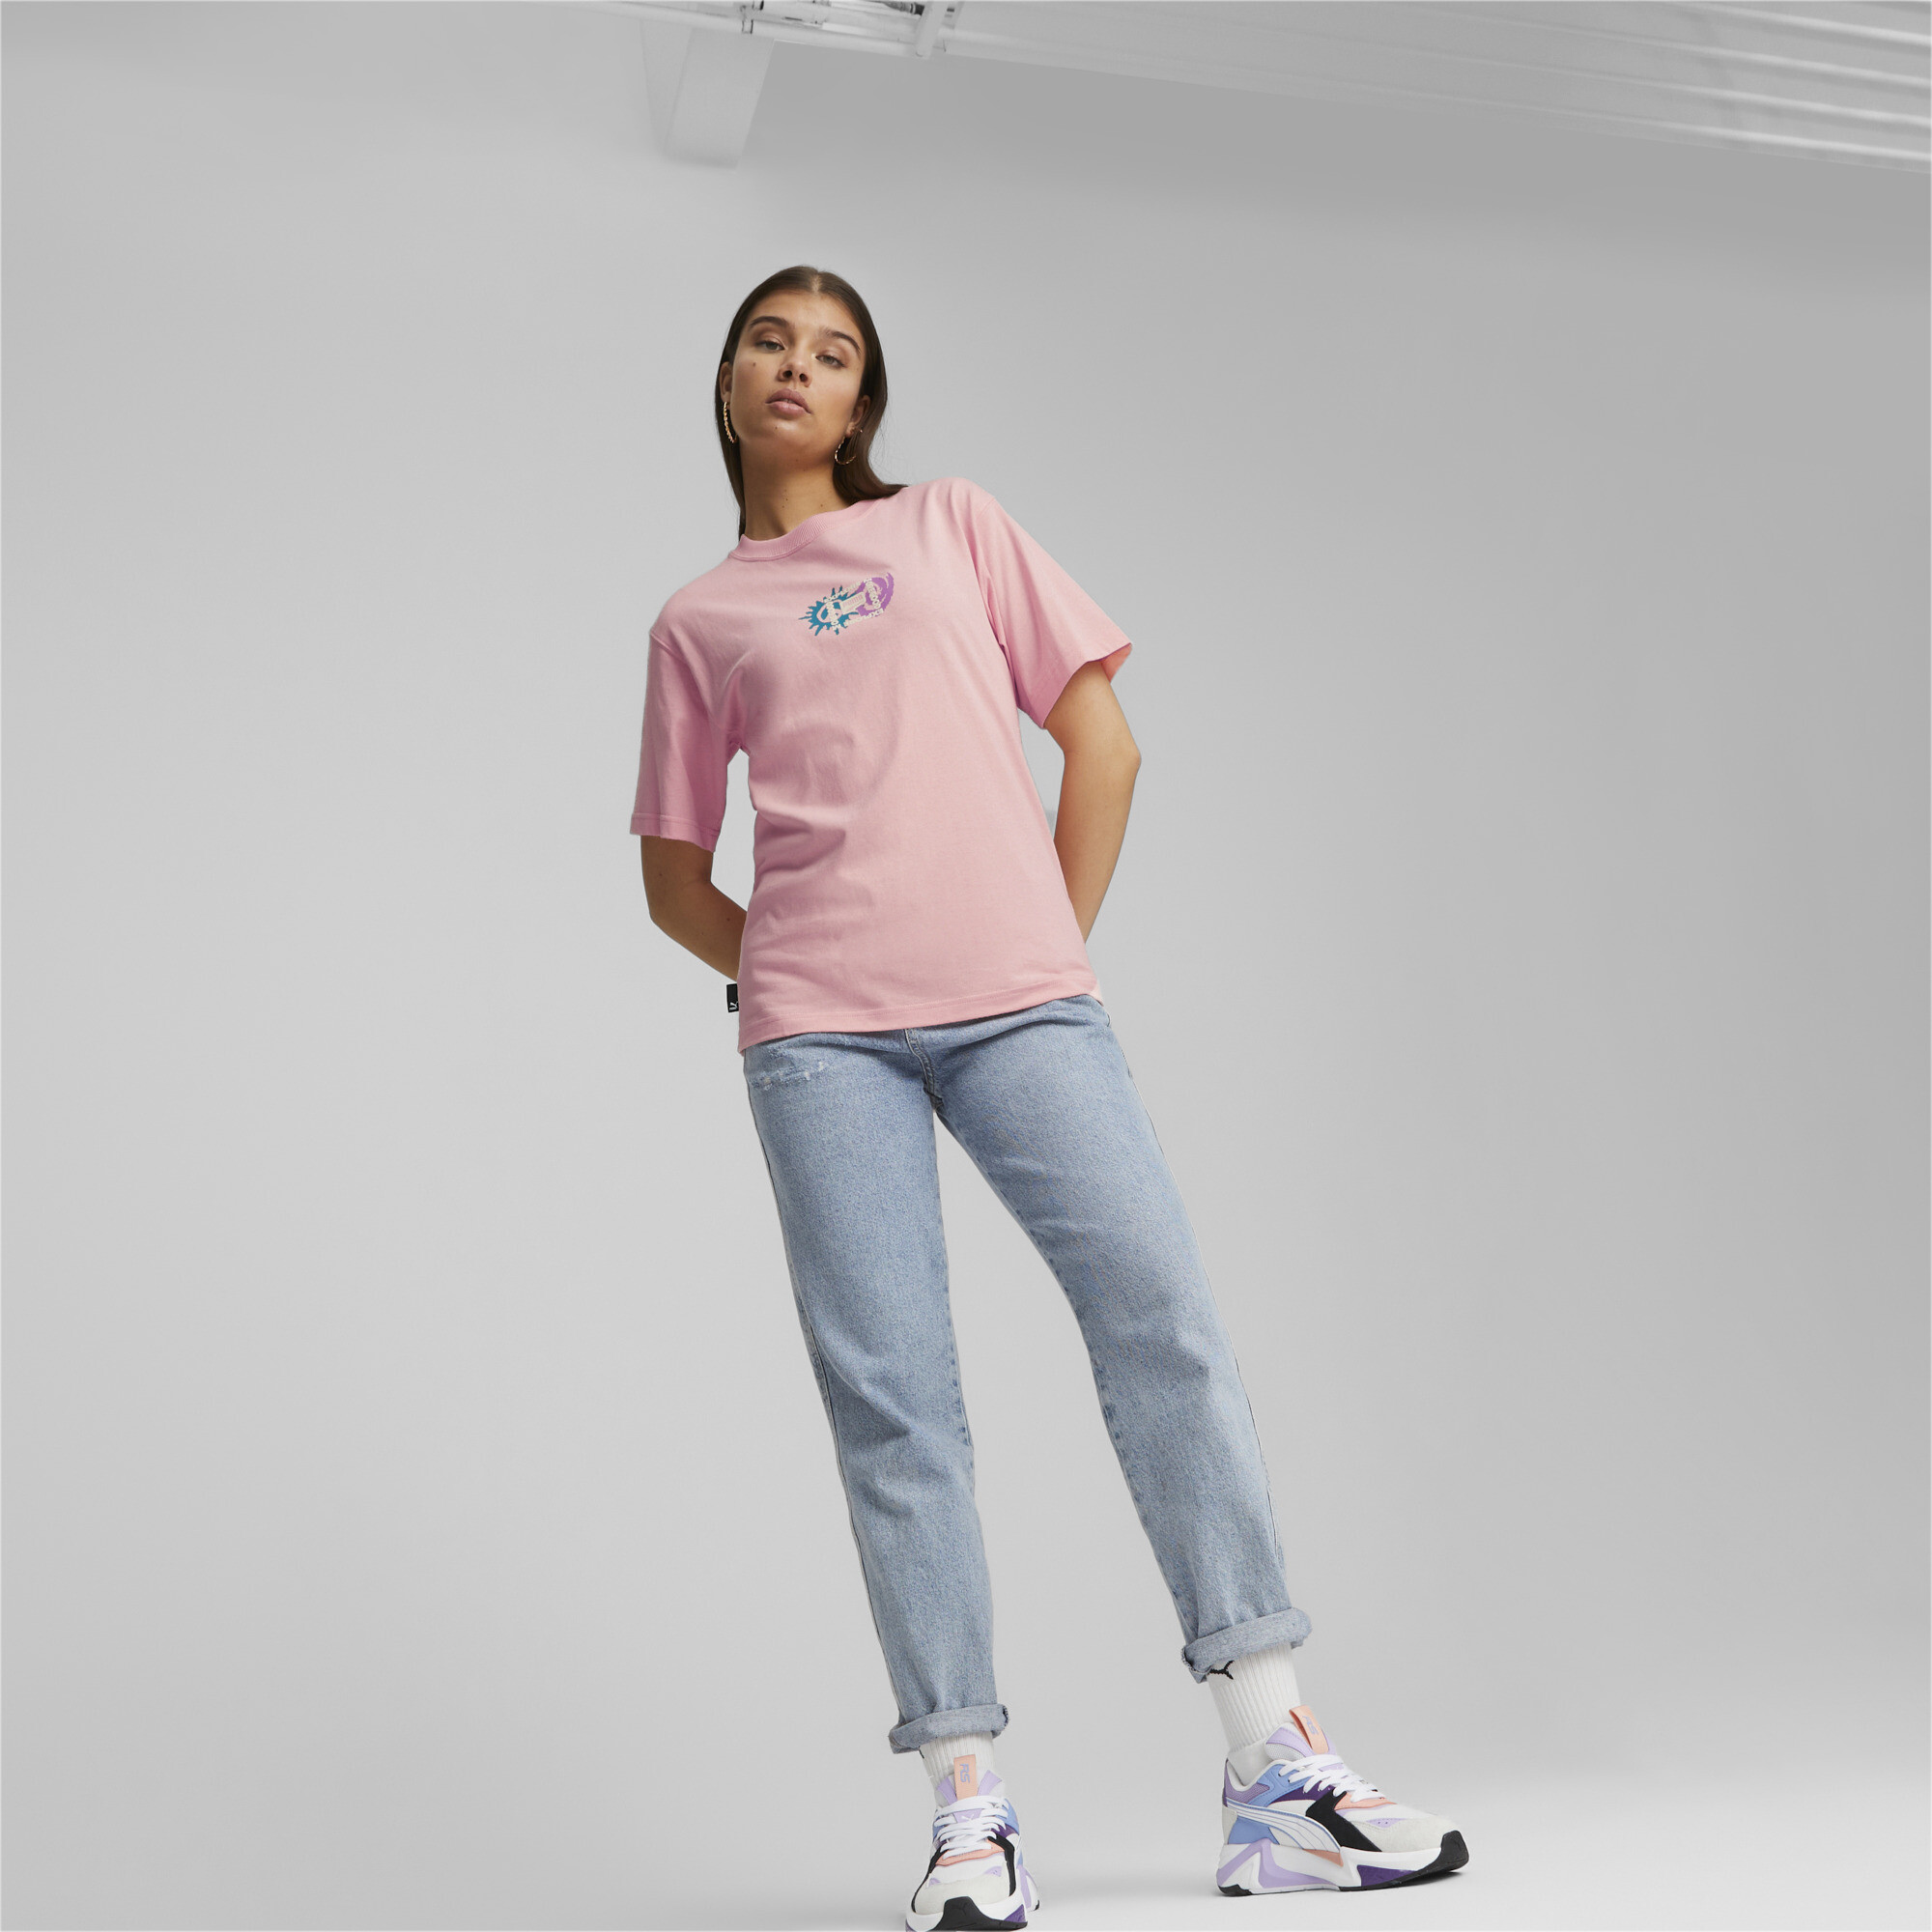 Women's PUMA DOWNTOWN Graphic T-Shirt In Pink, Size XS